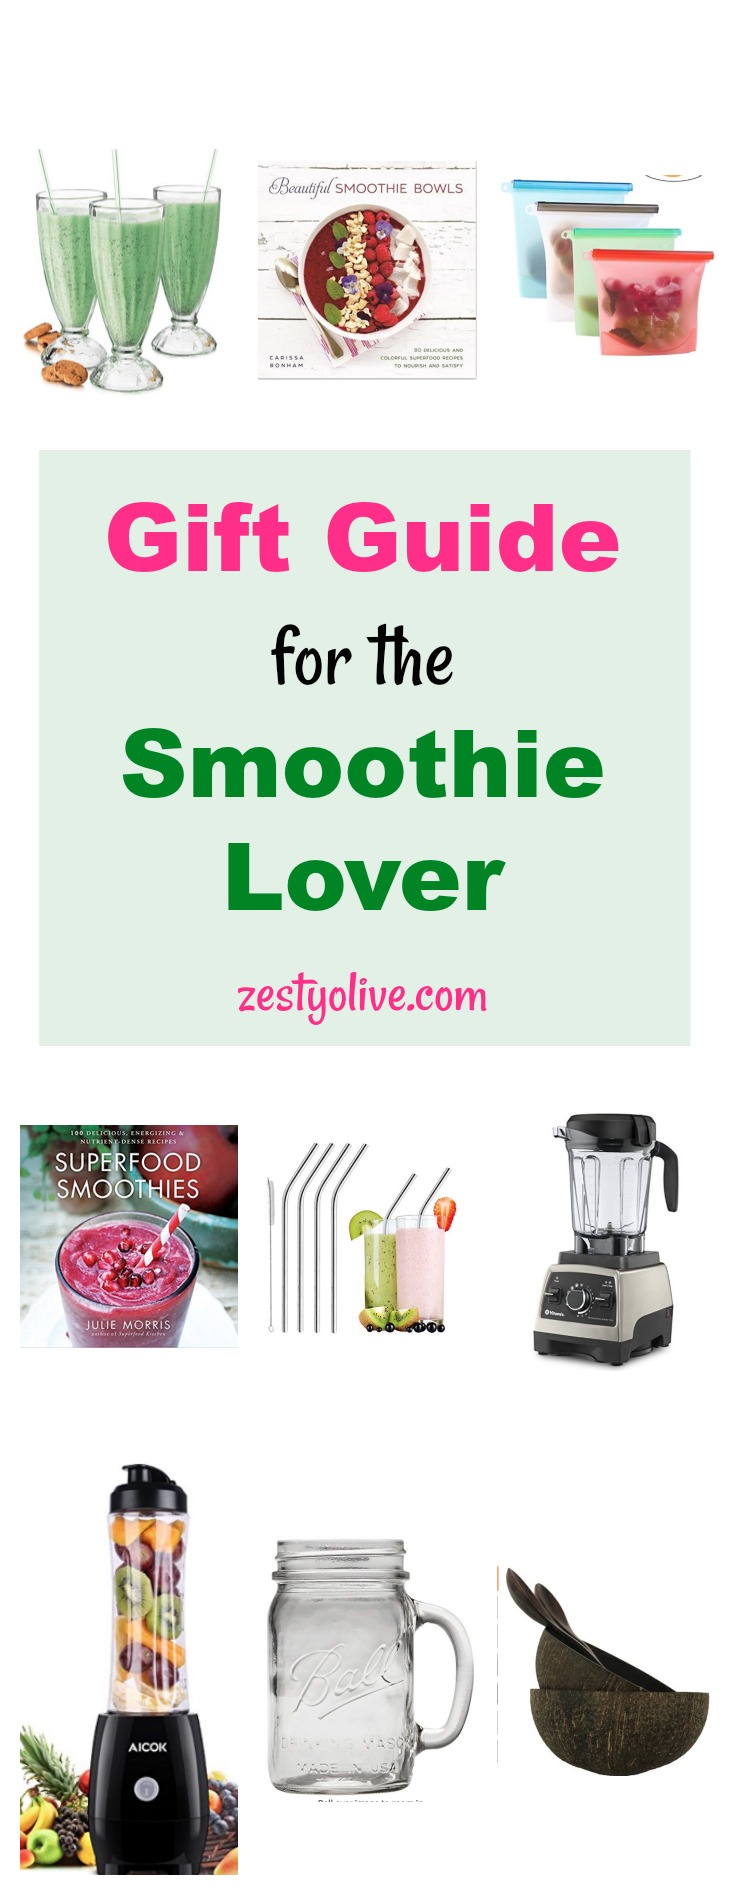 This Gift Guide for Smoothie Lovers will help you choose the perfect item for those in your life who love blending and crafting their protein shakes, smoothies and smoothie bowls.